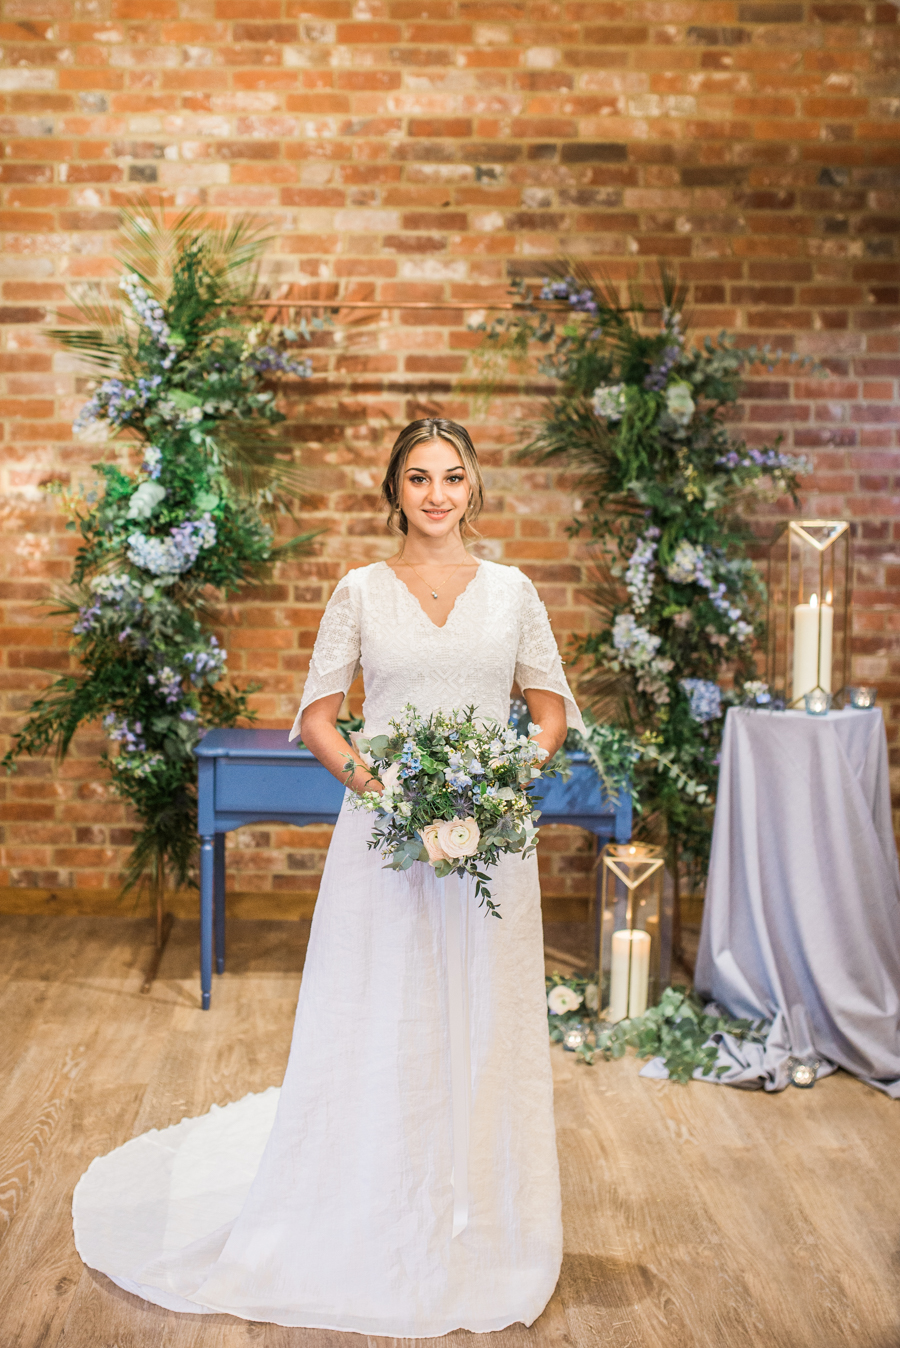 Beautiful blue wedding inspiration for 2021 couples, photo credit Laura Jane Photography (27)